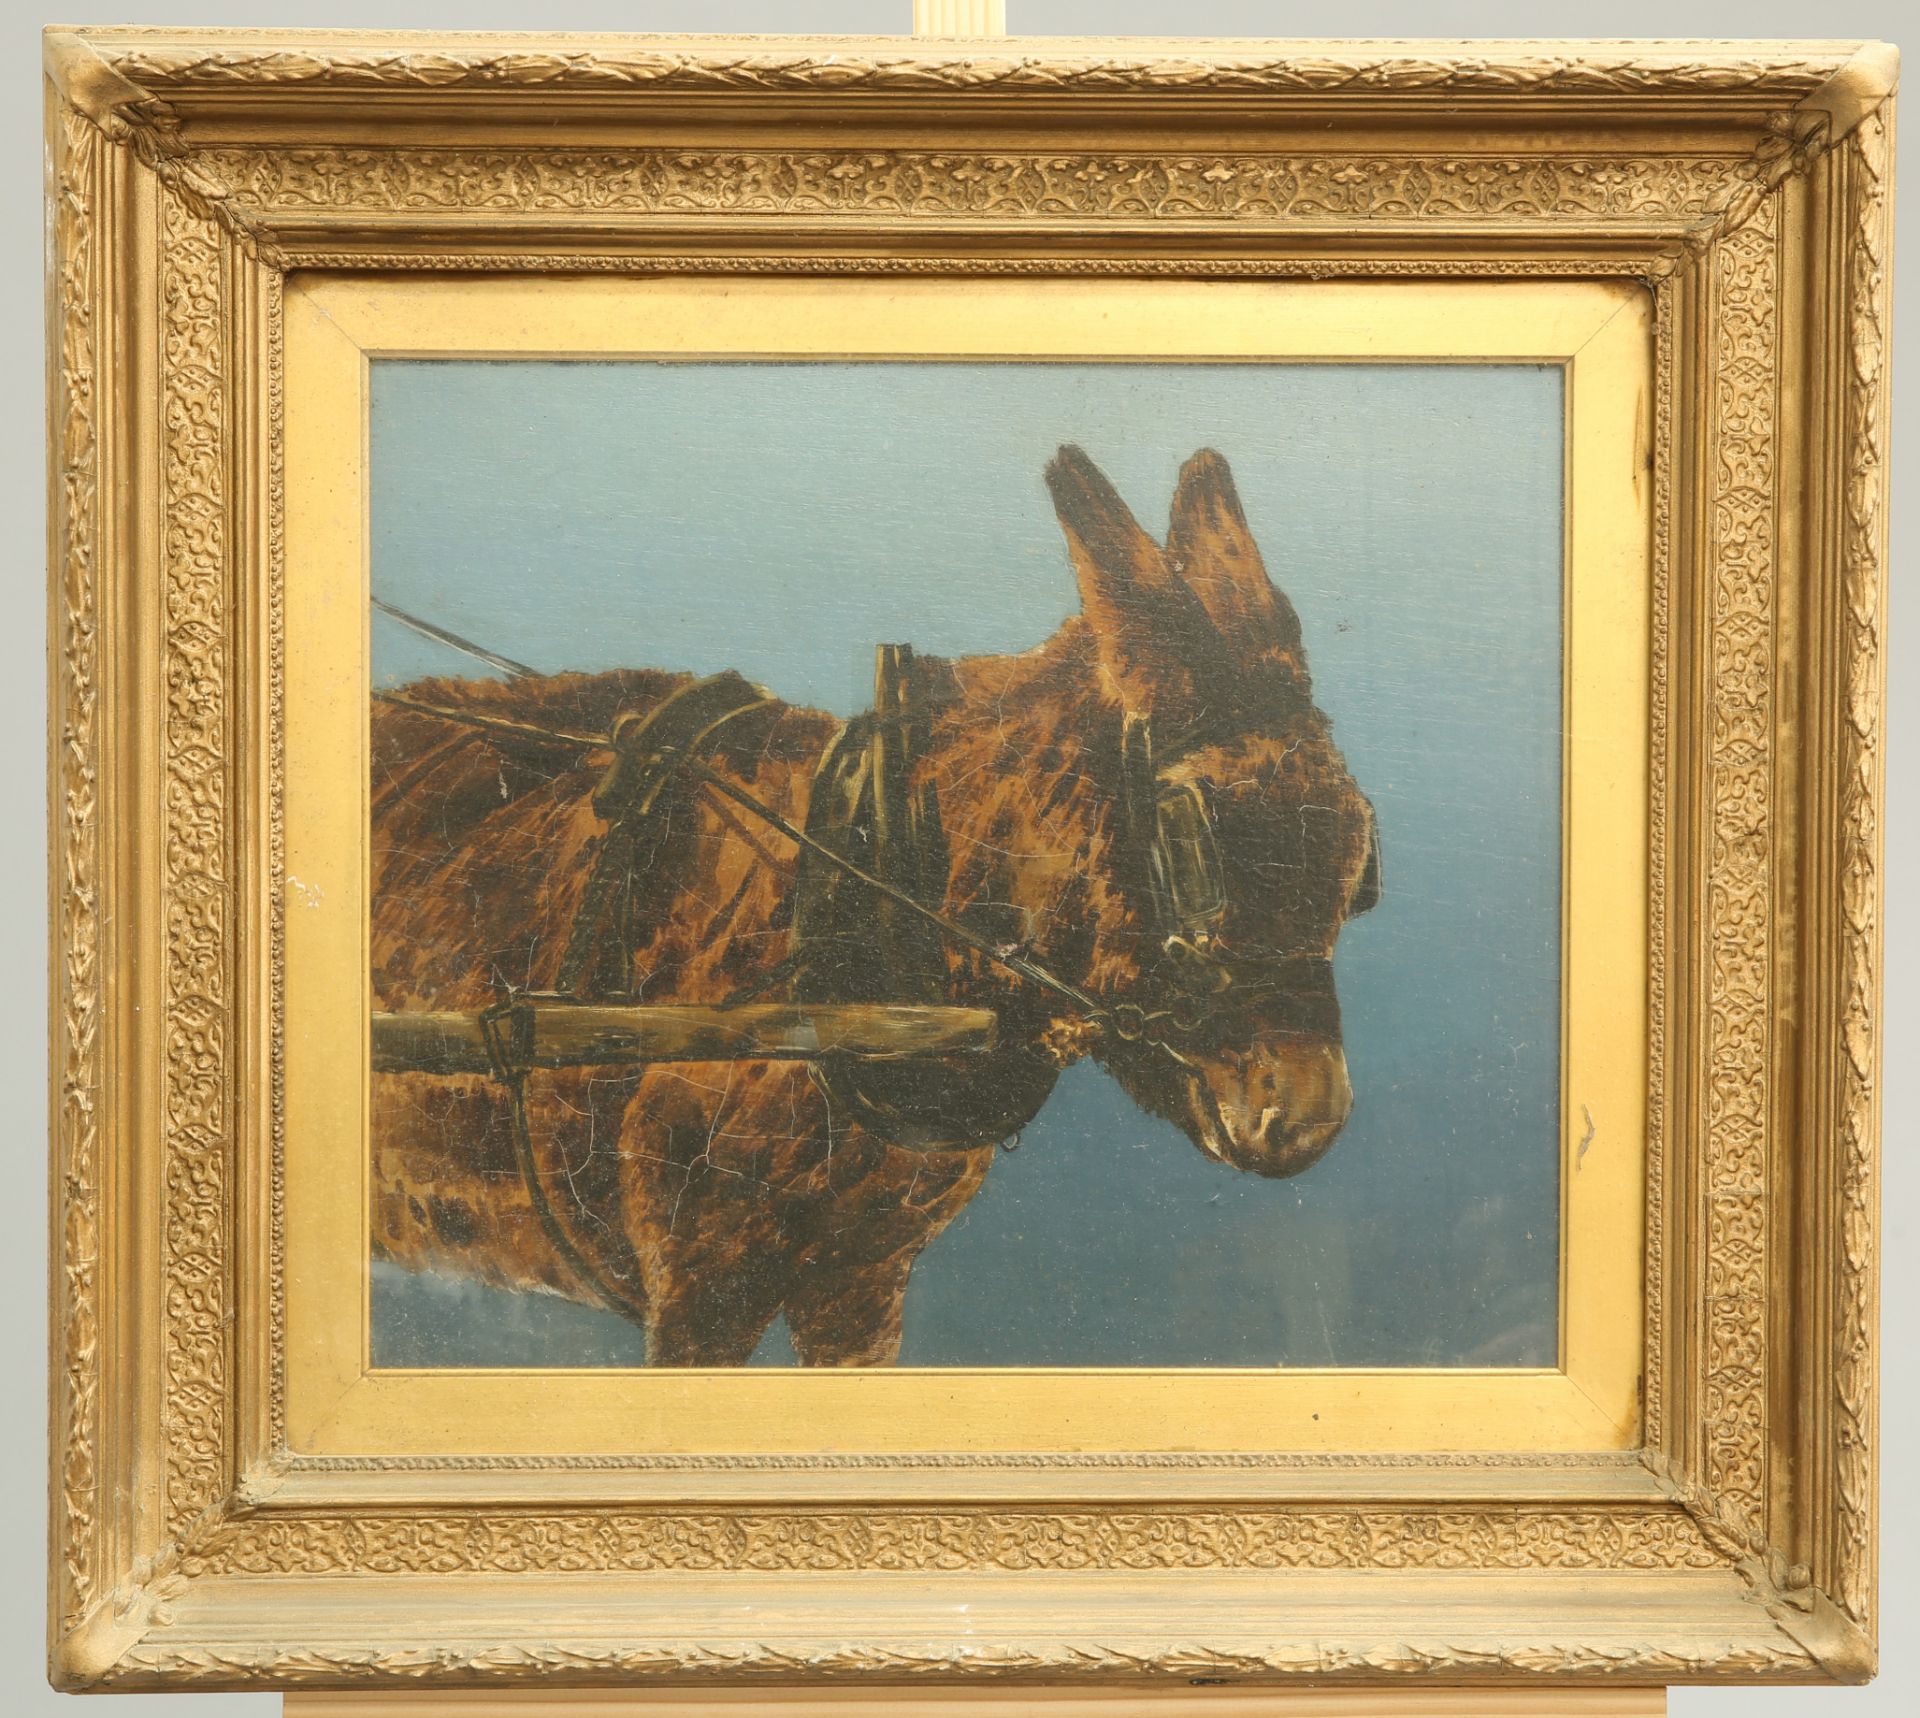 19TH CENTURY SCHOOL, "PATIENCE", STUDY OF A DONKEY, bears monogram lower right, inscribed and signed